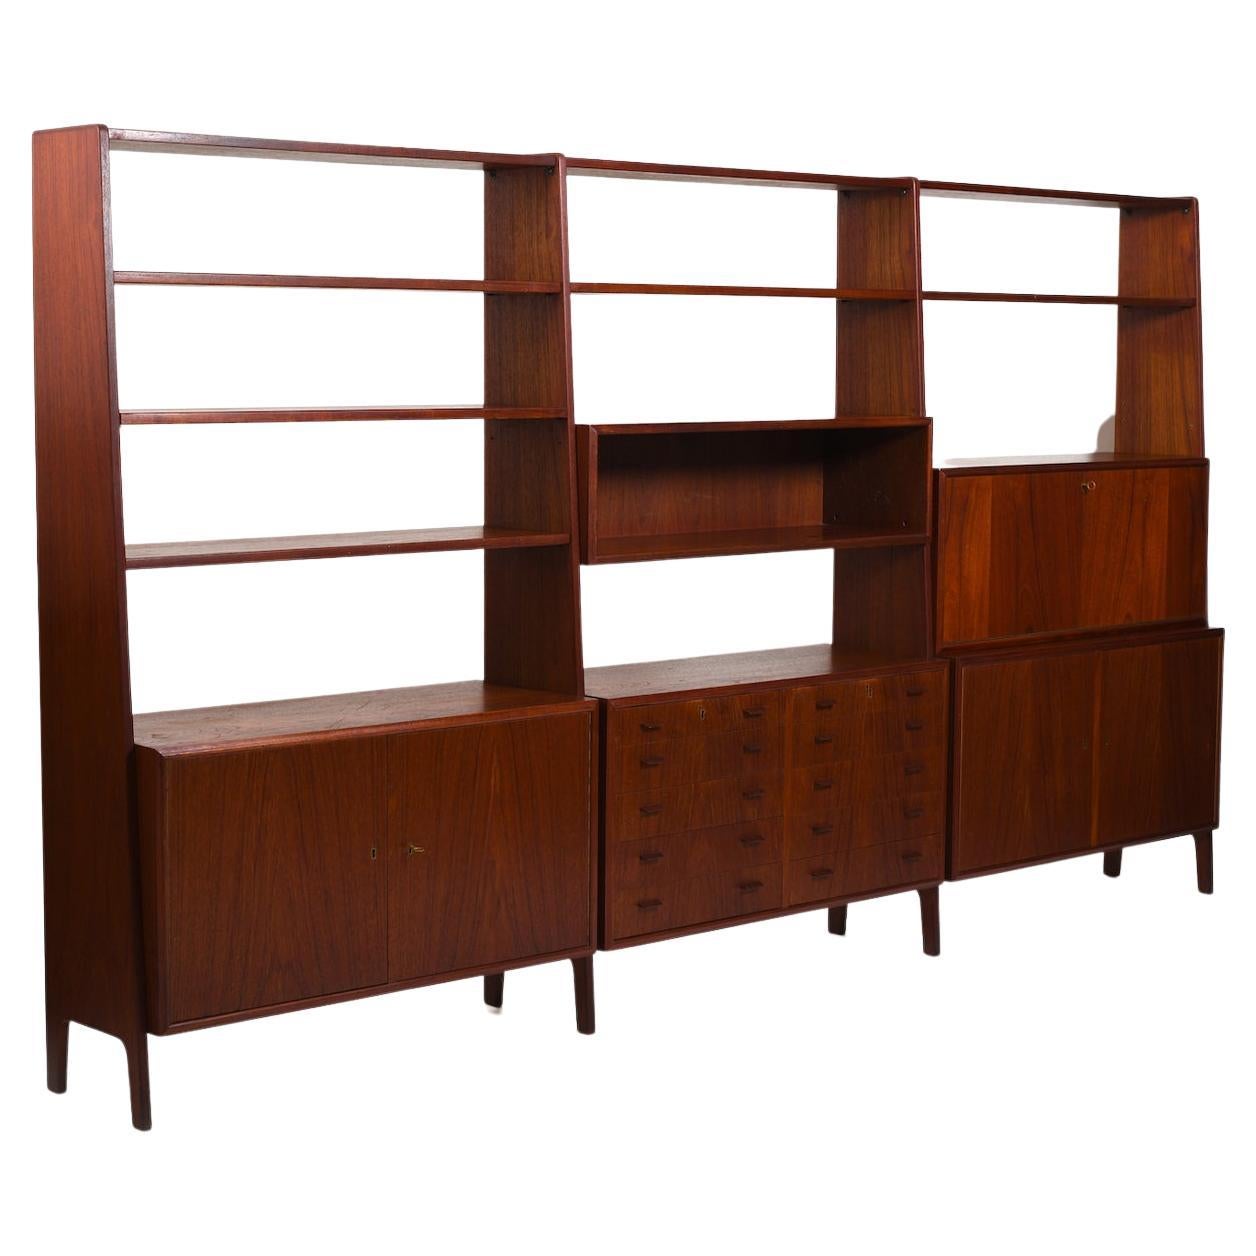 Danish Freestanding Teak Shelf System 1950s with Cabinets For Sale